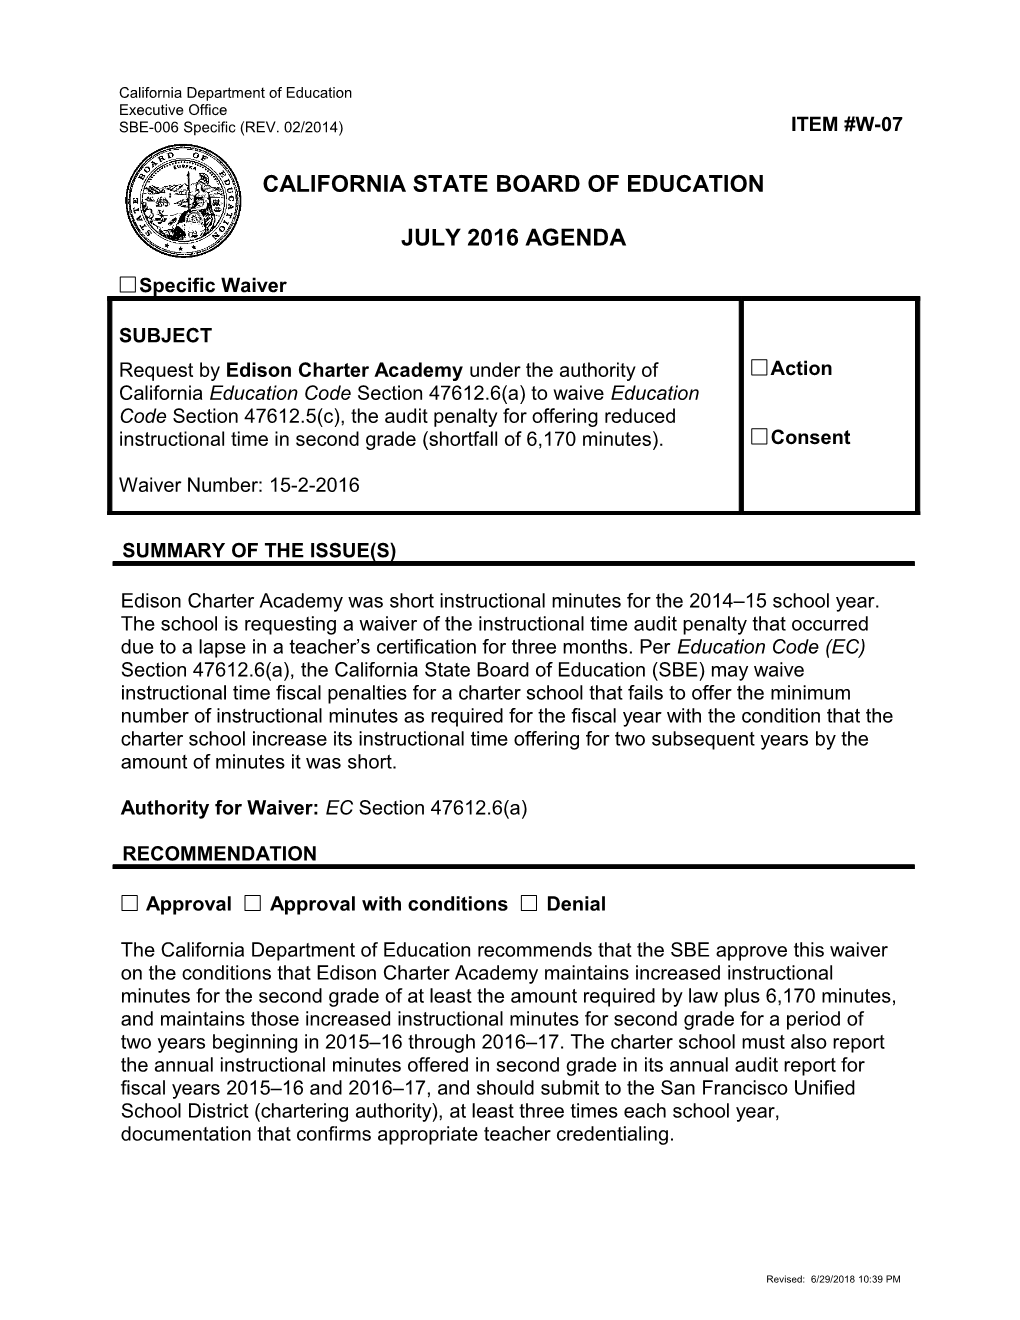 July 2016 Waiver Item W-07 - Meeting Agendas (CA State Board of Education)